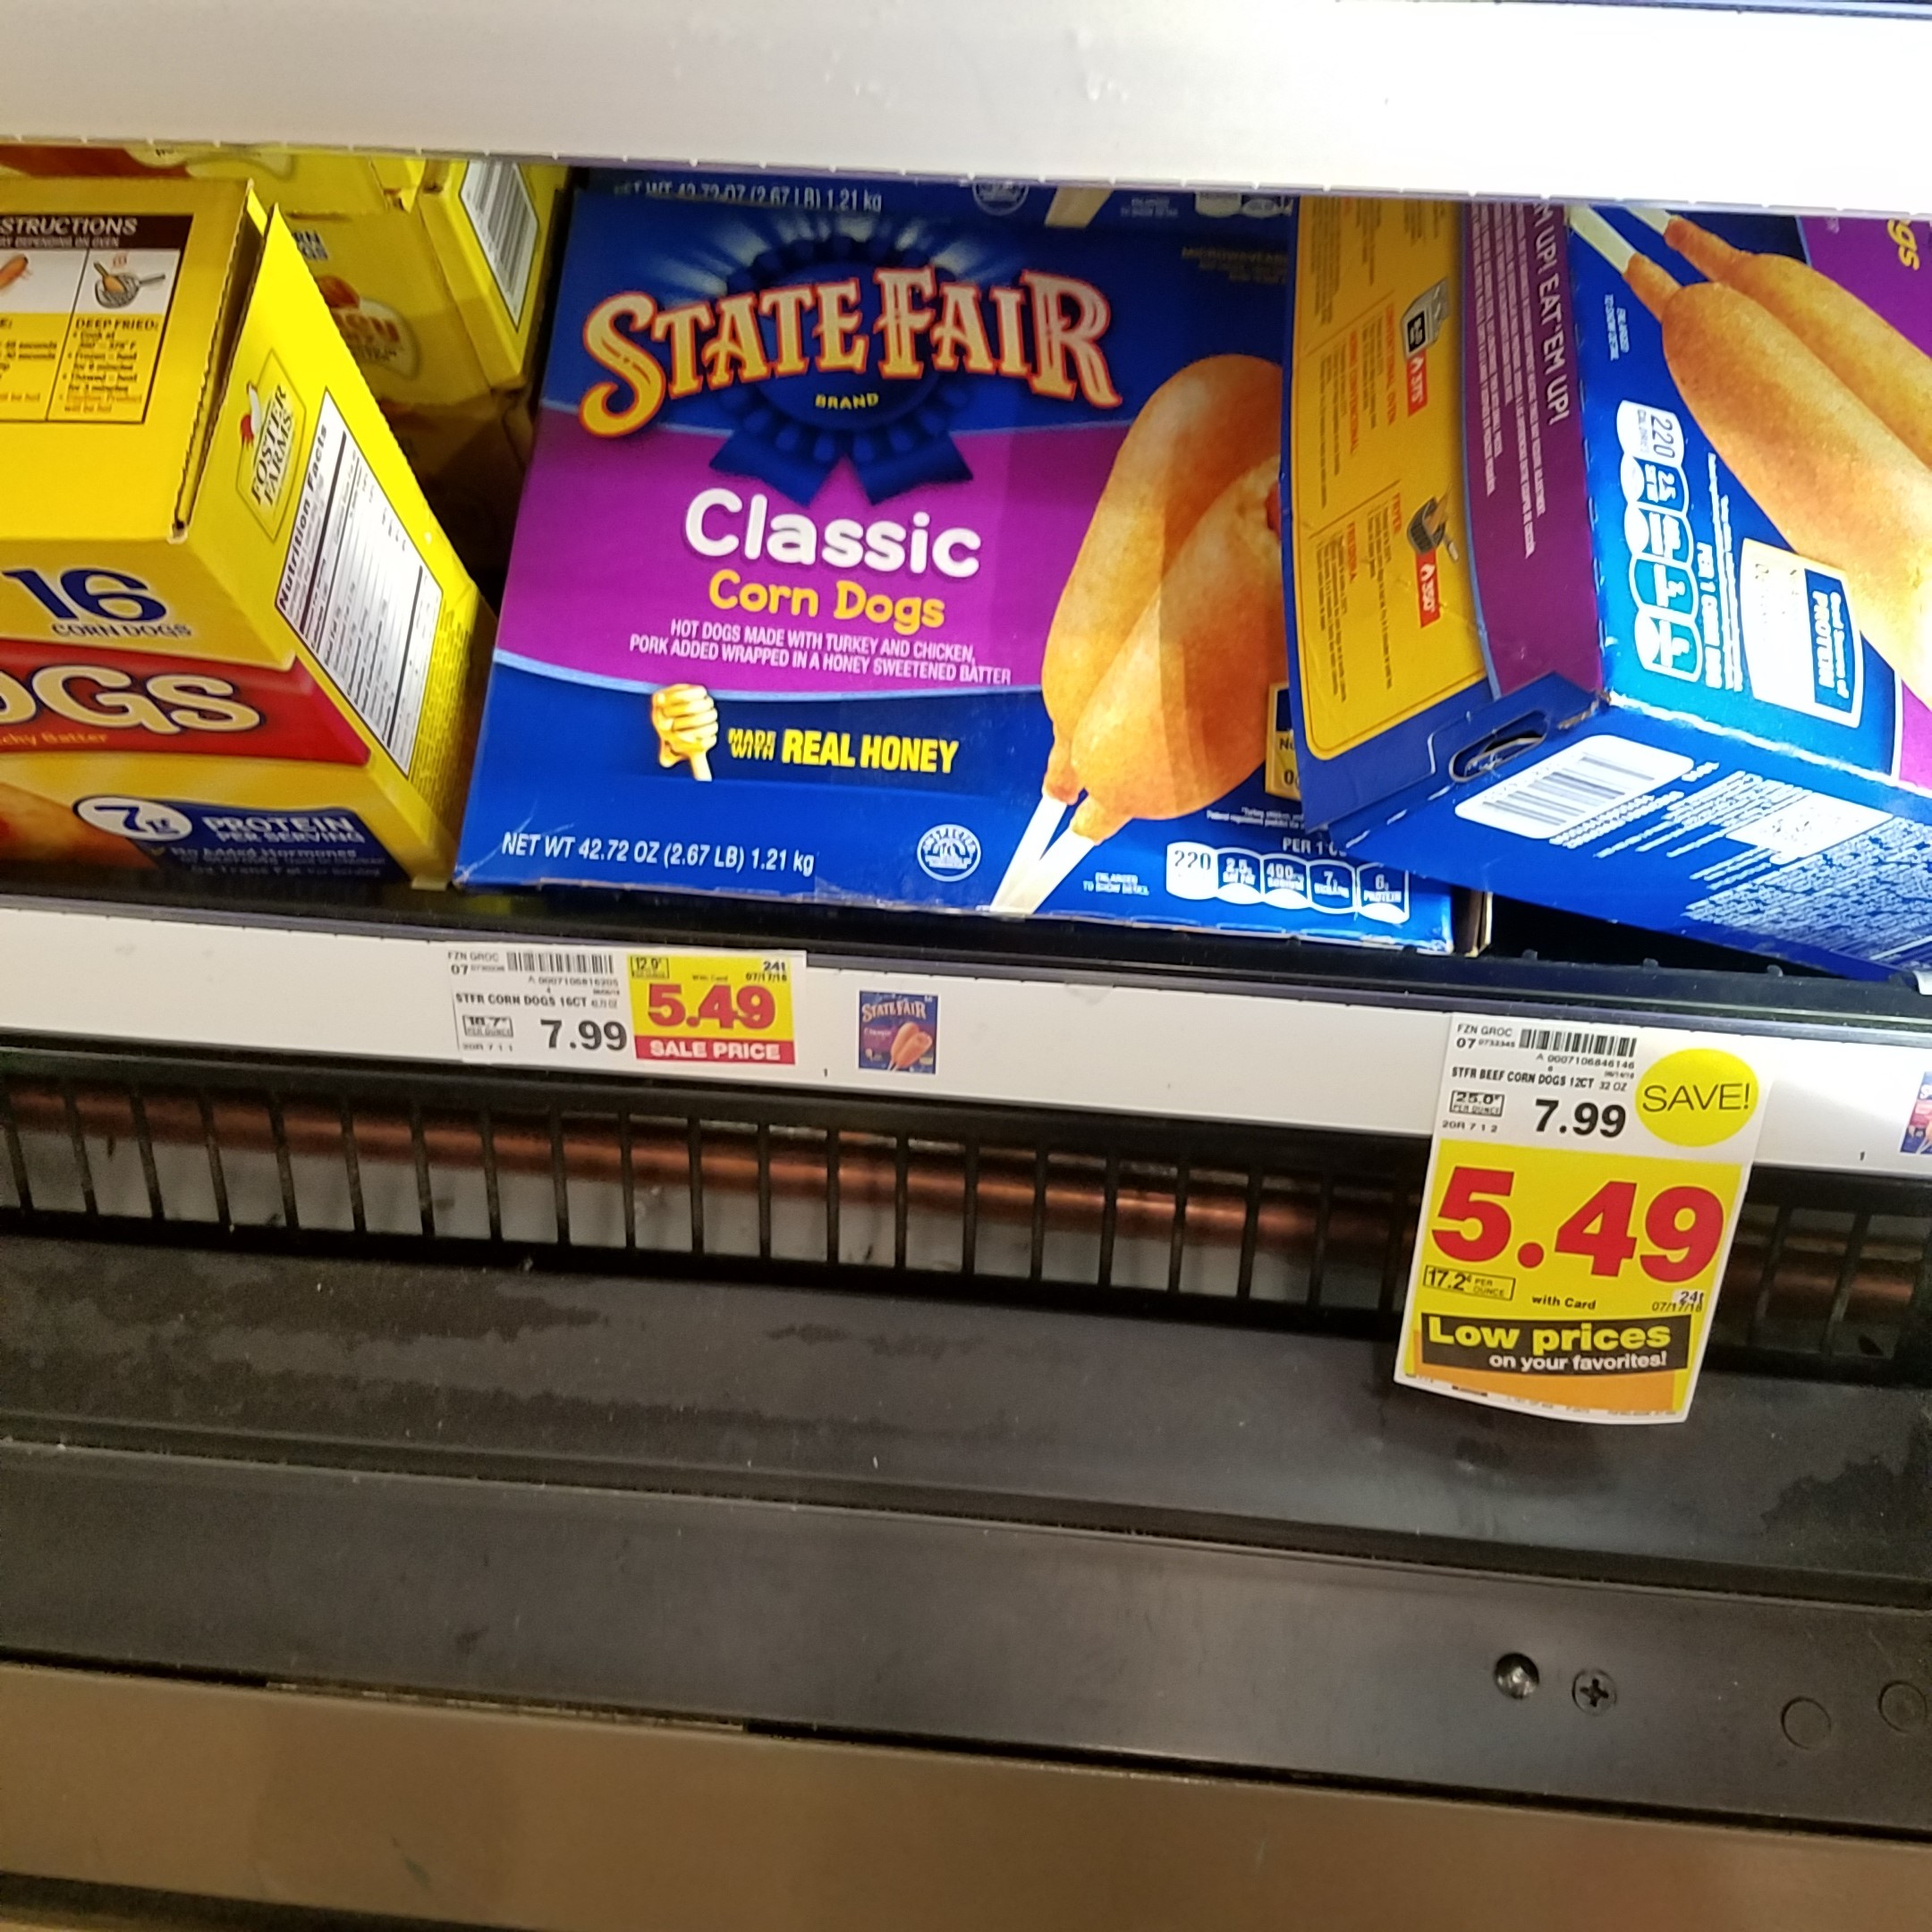 State Fair Corn Dogs just 4.74 Kroger Couponing